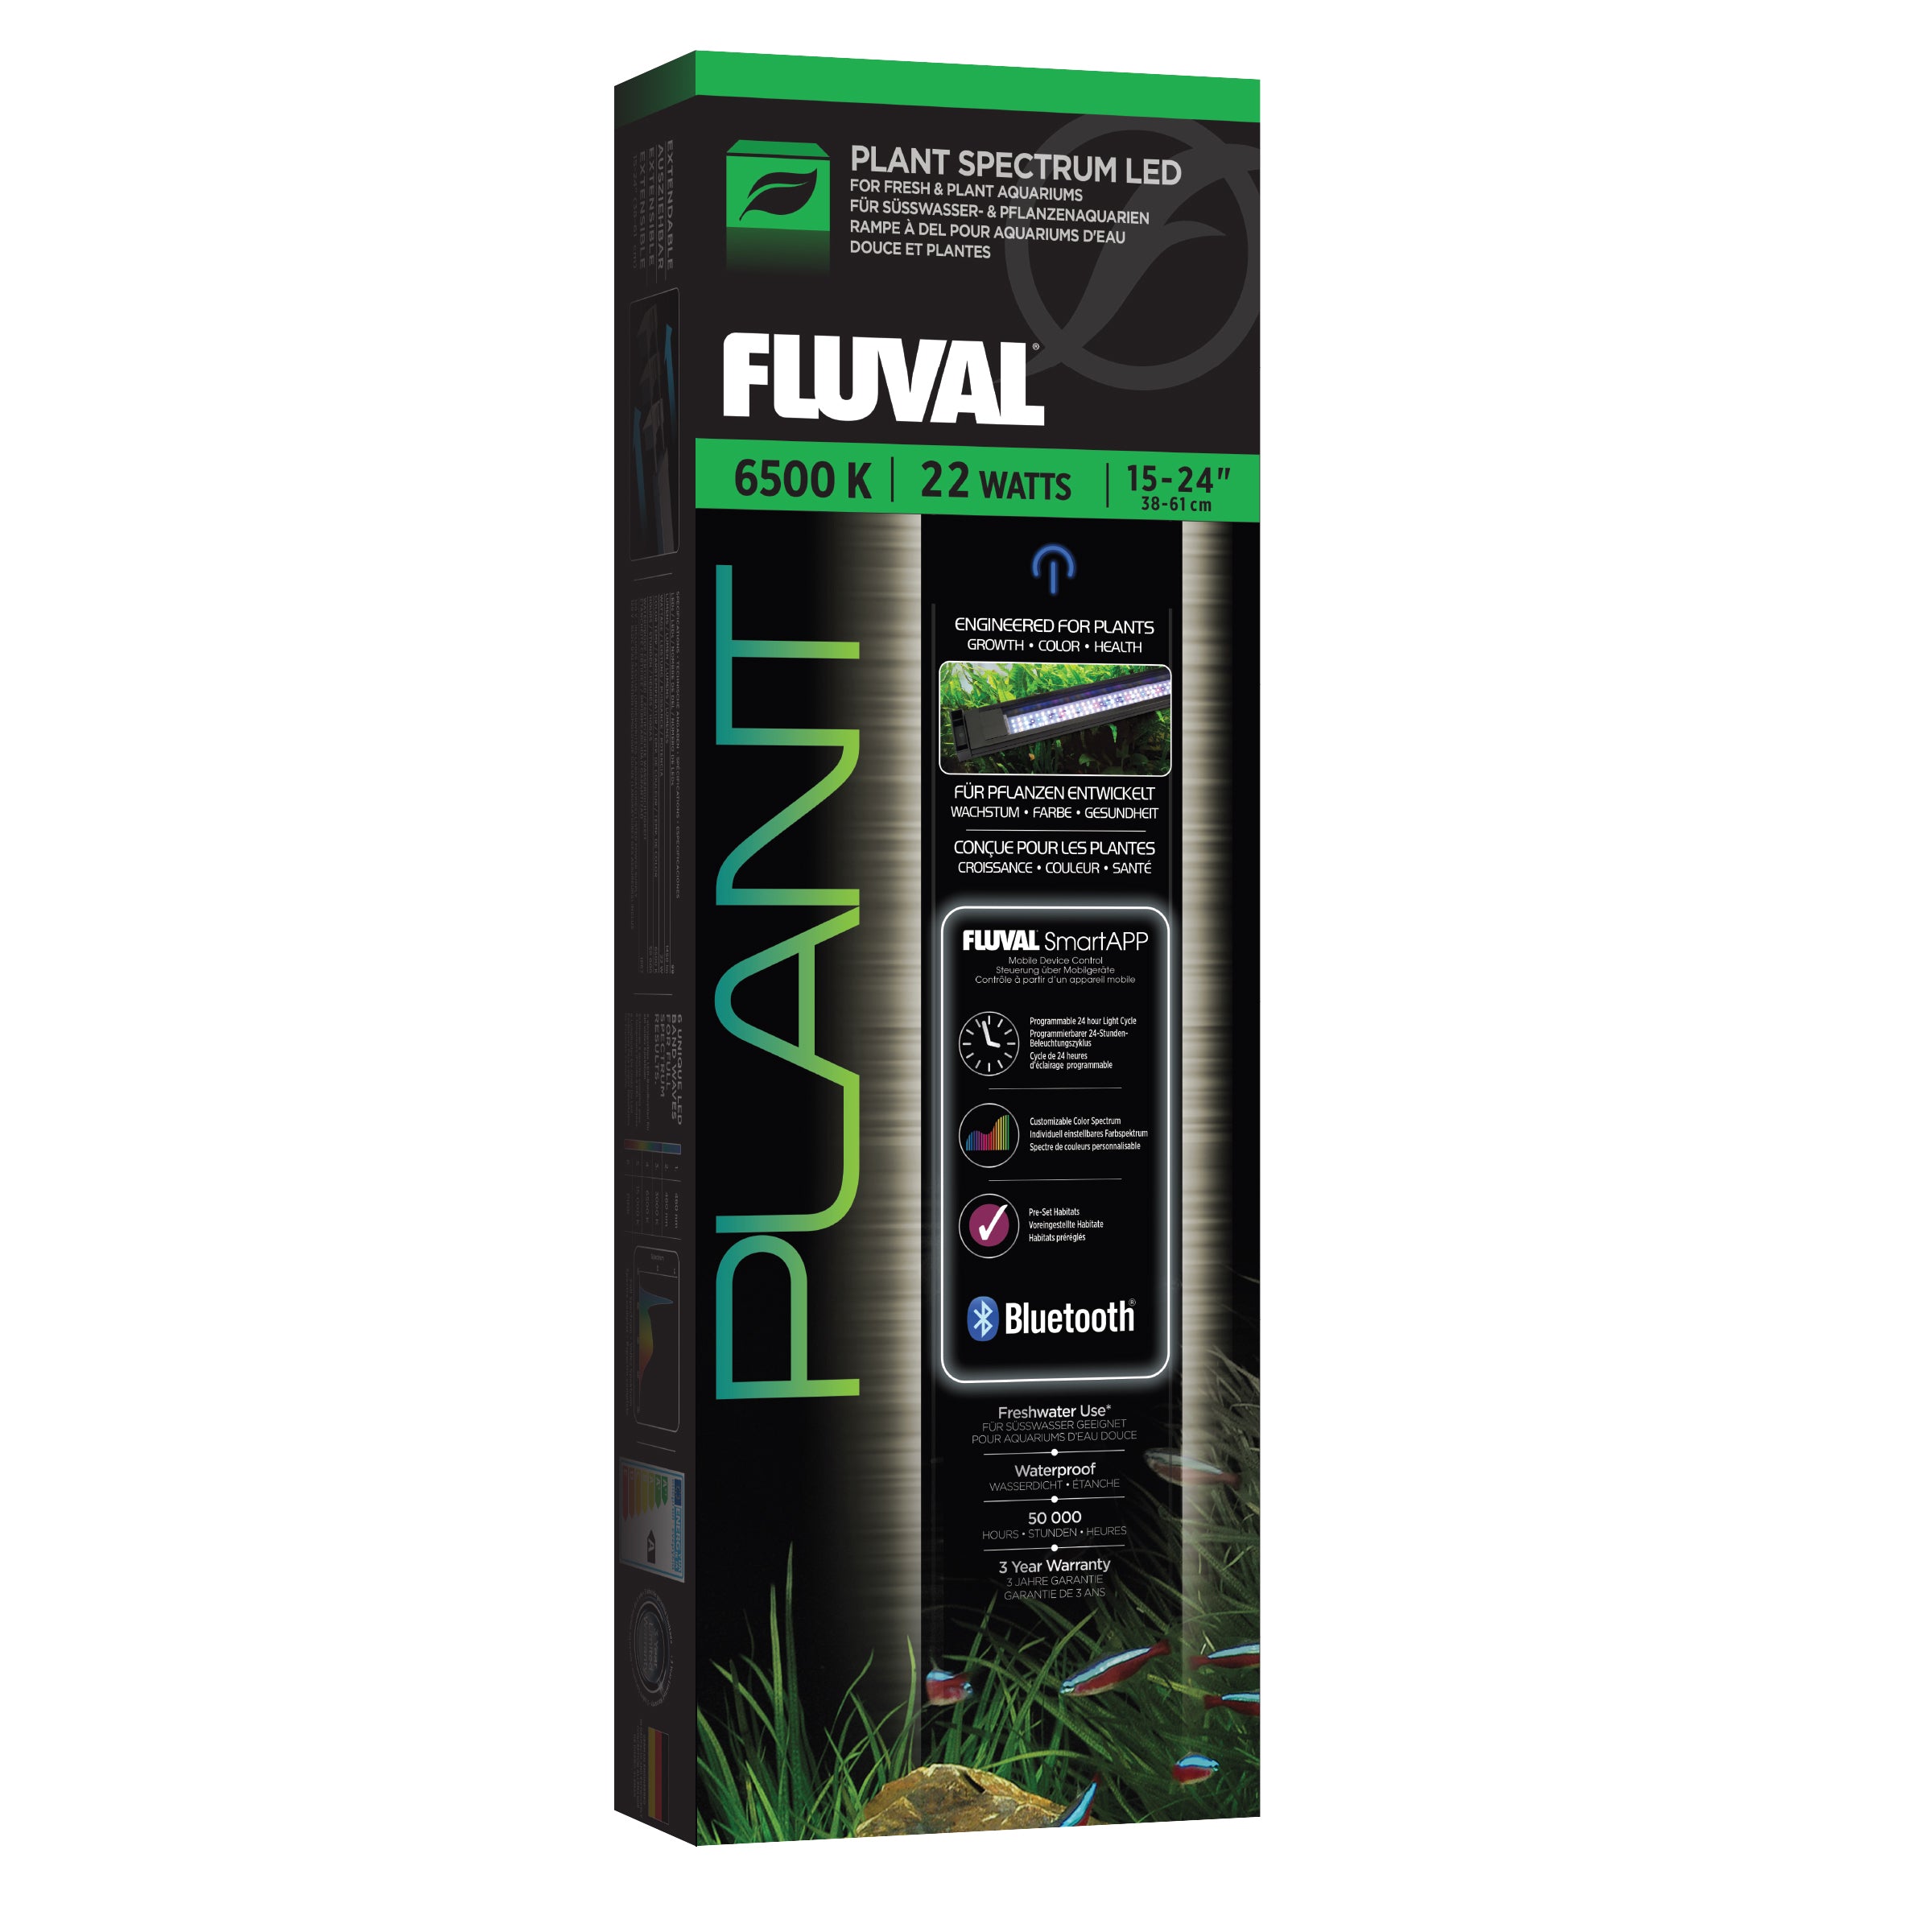 Fluval Plant Spectrum LED with Bluetooth